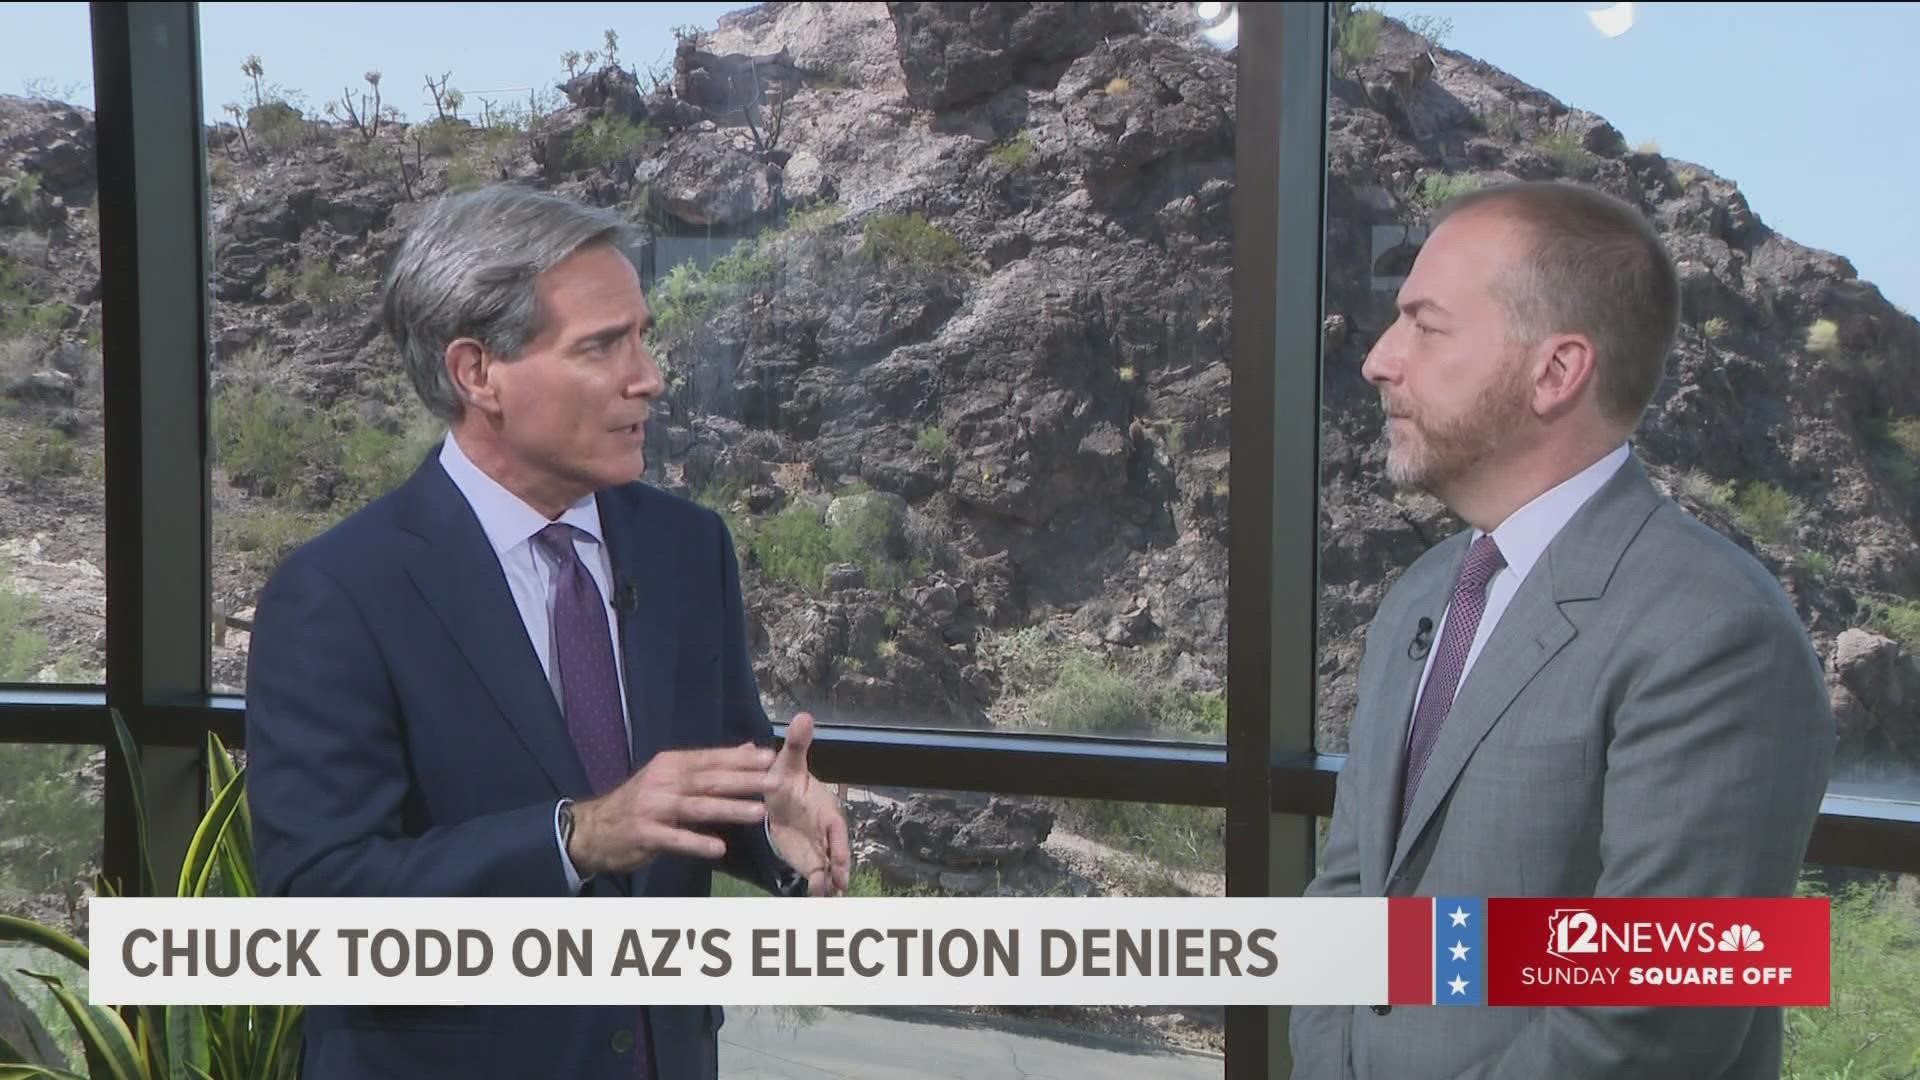 "Meet the Press" moderator Chuck Todd discussed Arizona politics with "Square Off" host Brahm Resnik during a Tempe visit last week.